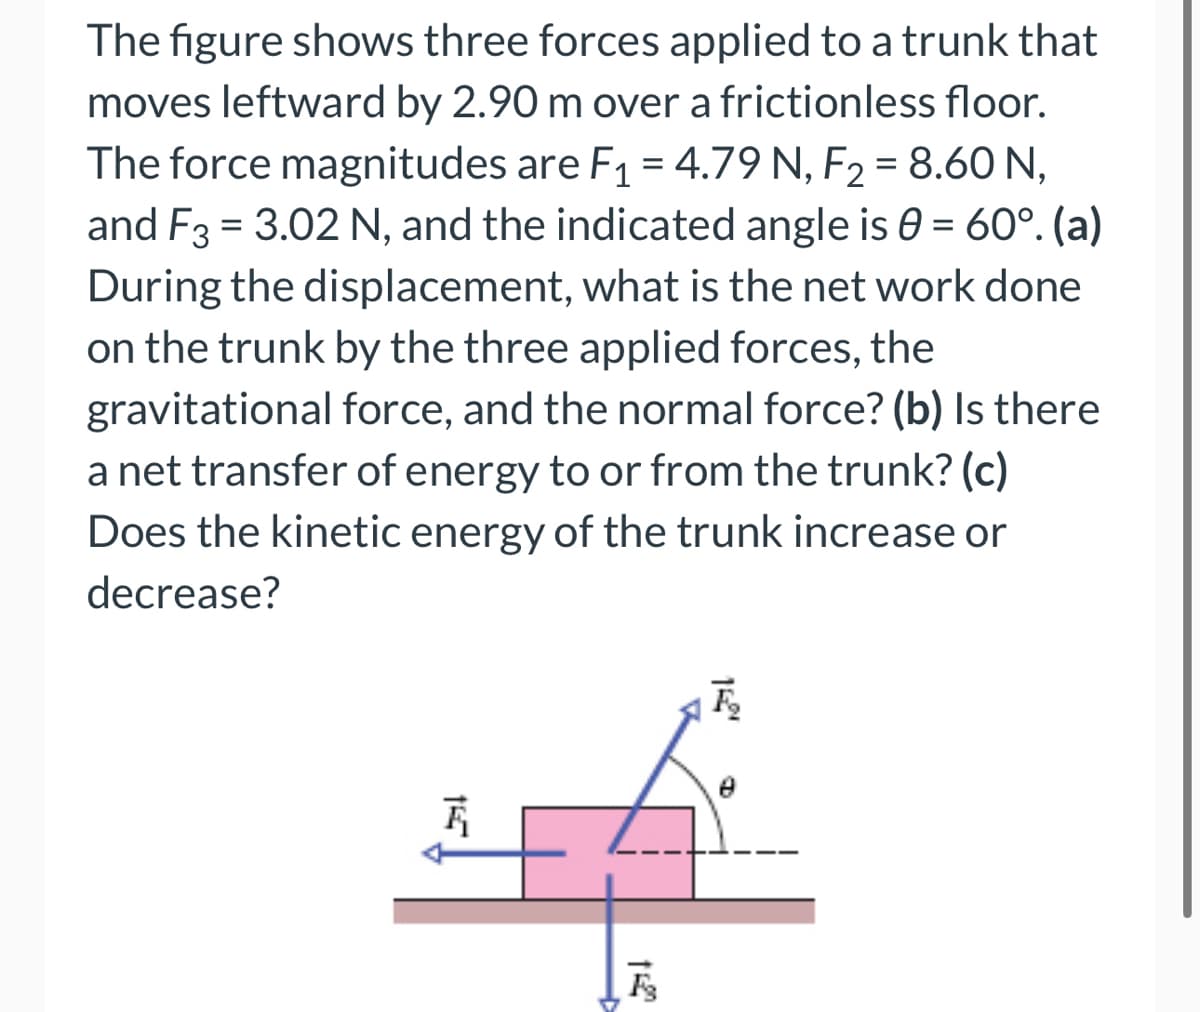 The figure shows three forces applied to a trunk that
moves leftward by 2.90 m over a frictionless floor.
The force magnitudes are F₁ = 4.79 N, F₂ = 8.60 N,
and F3 = 3.02 N, and the indicated angle is 0 = 60°. (a)
During the displacement, what is the net work done
on the trunk by the three applied forces, the
gravitational force, and the normal force? (b) Is there
a net transfer of energy to or from the trunk? (c)
Does the kinetic energy of the trunk increase or
decrease?
F